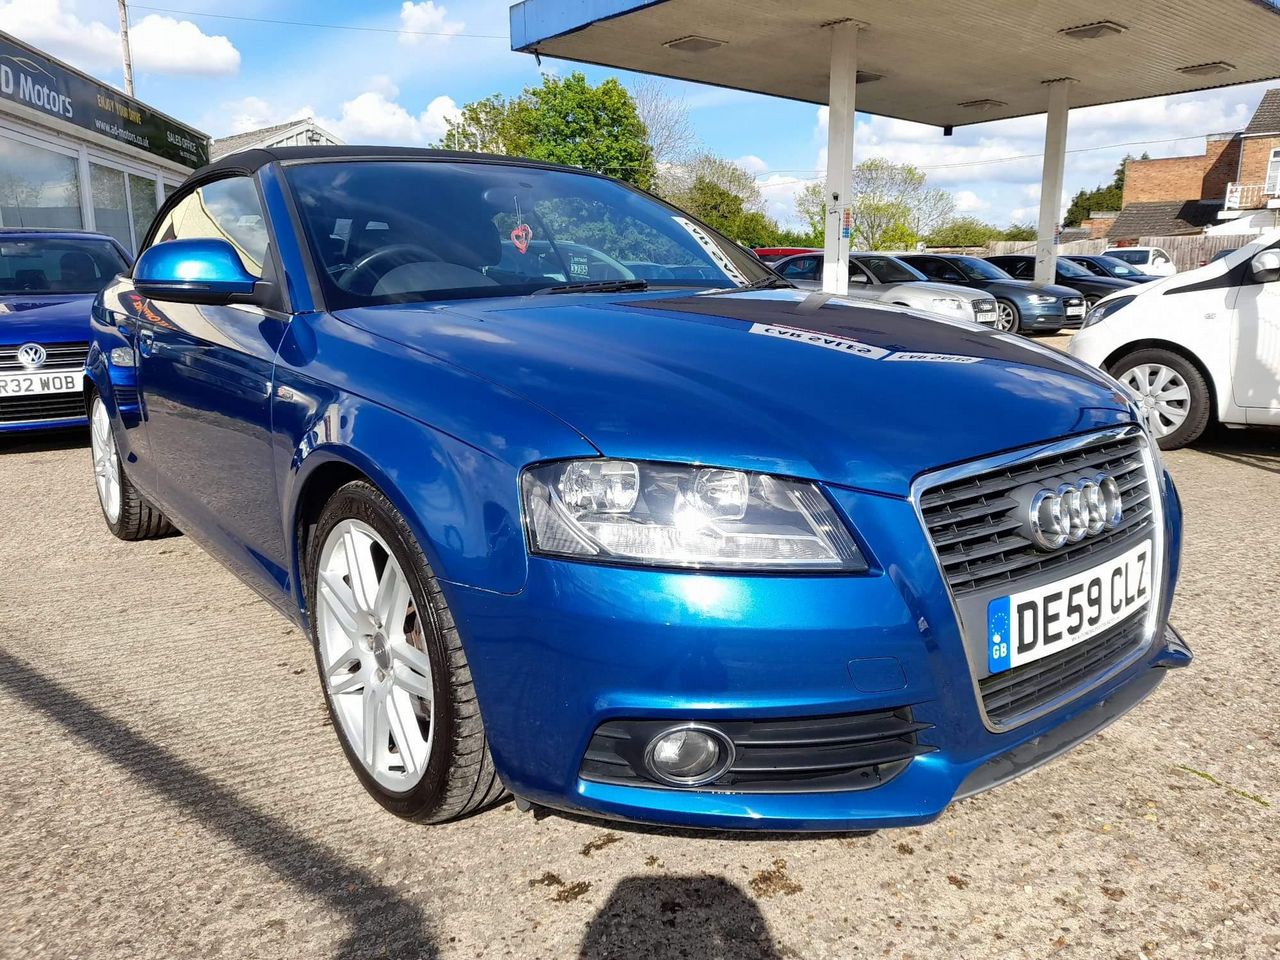 2009 Audi A3 Cabriolet 2.0 TDI S line Euro 4 2dr - Picture 3 of 37